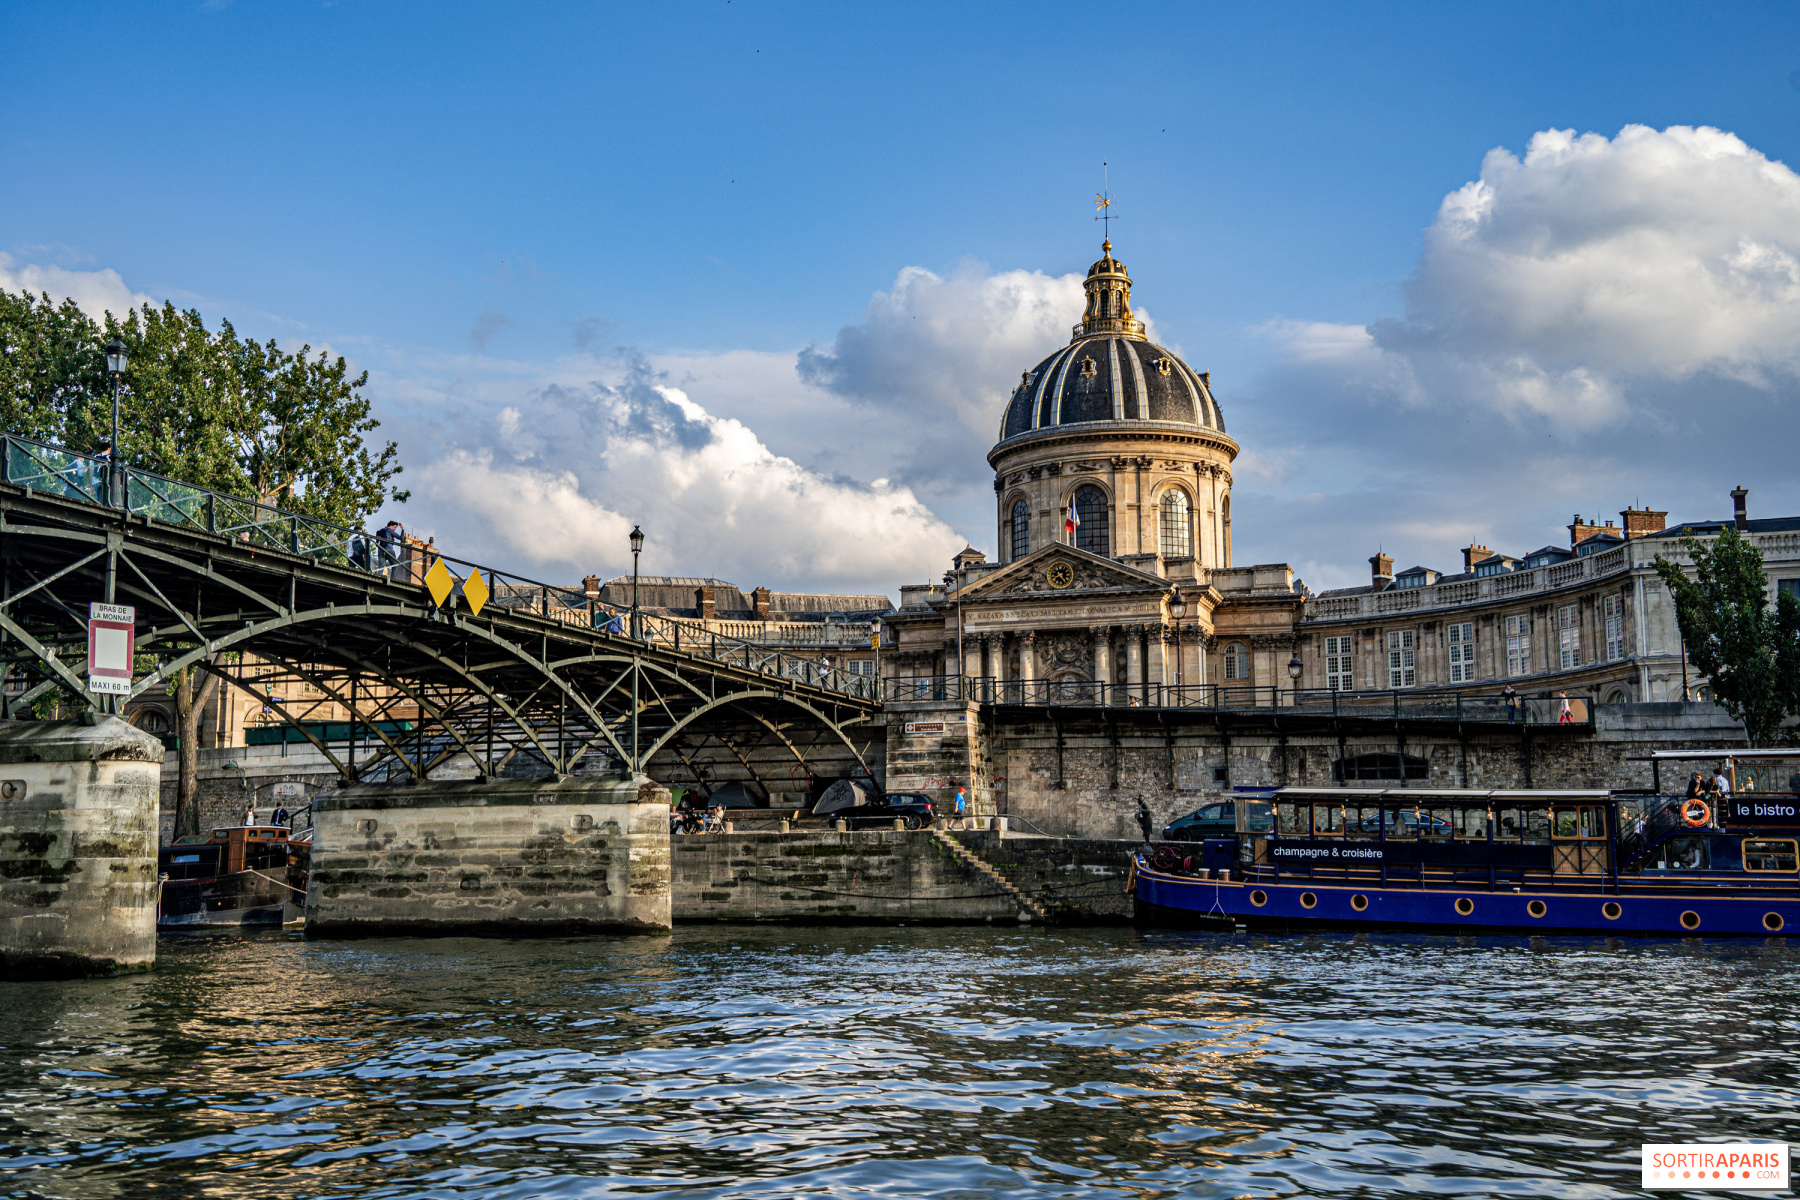 Paris: listed as historic monument, the Pont des Arts will be